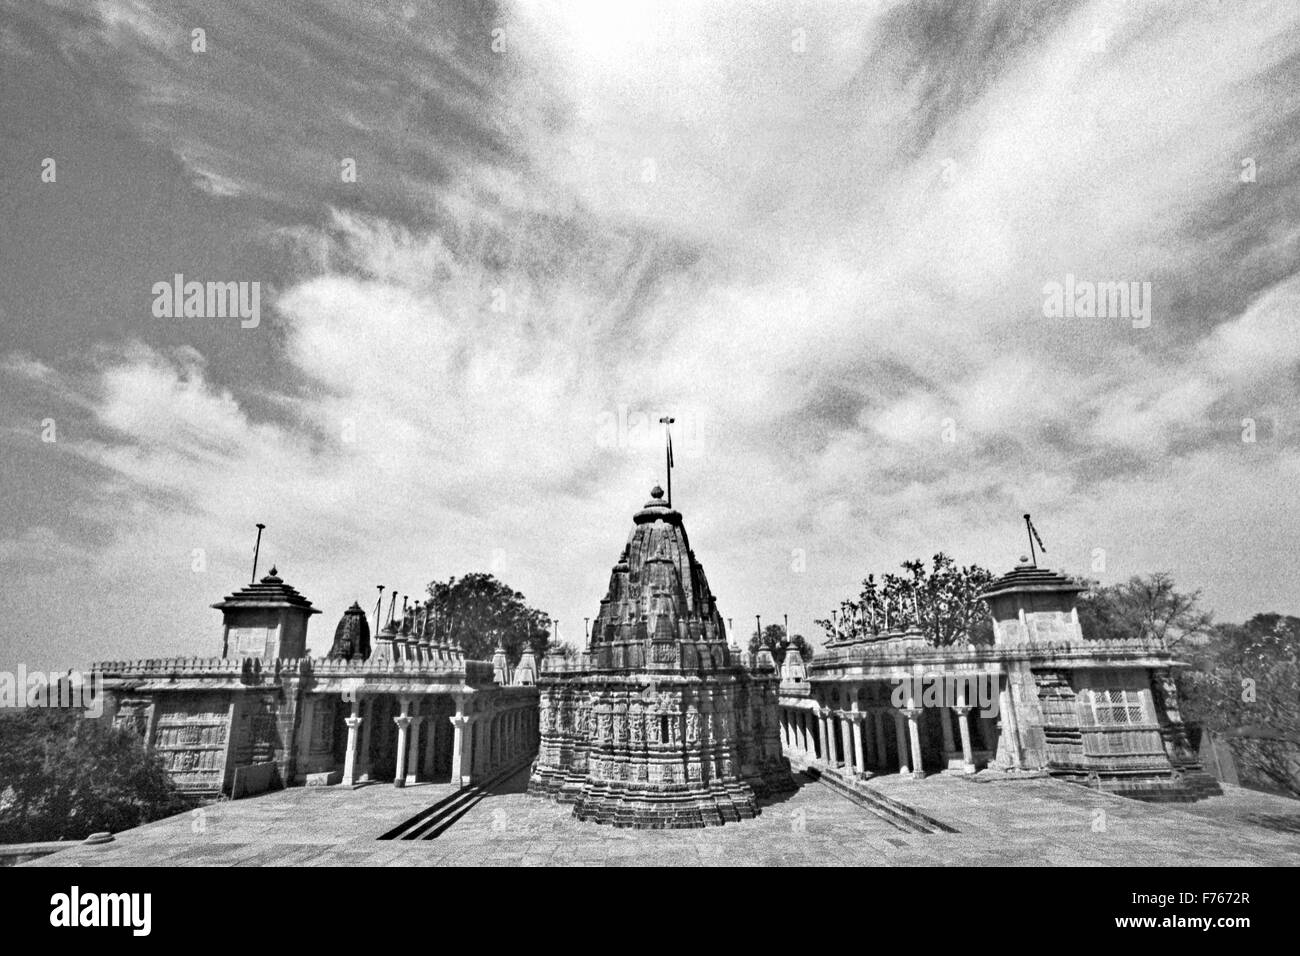 Rajasthani temple Black and White Stock Photos & Images - Alamy